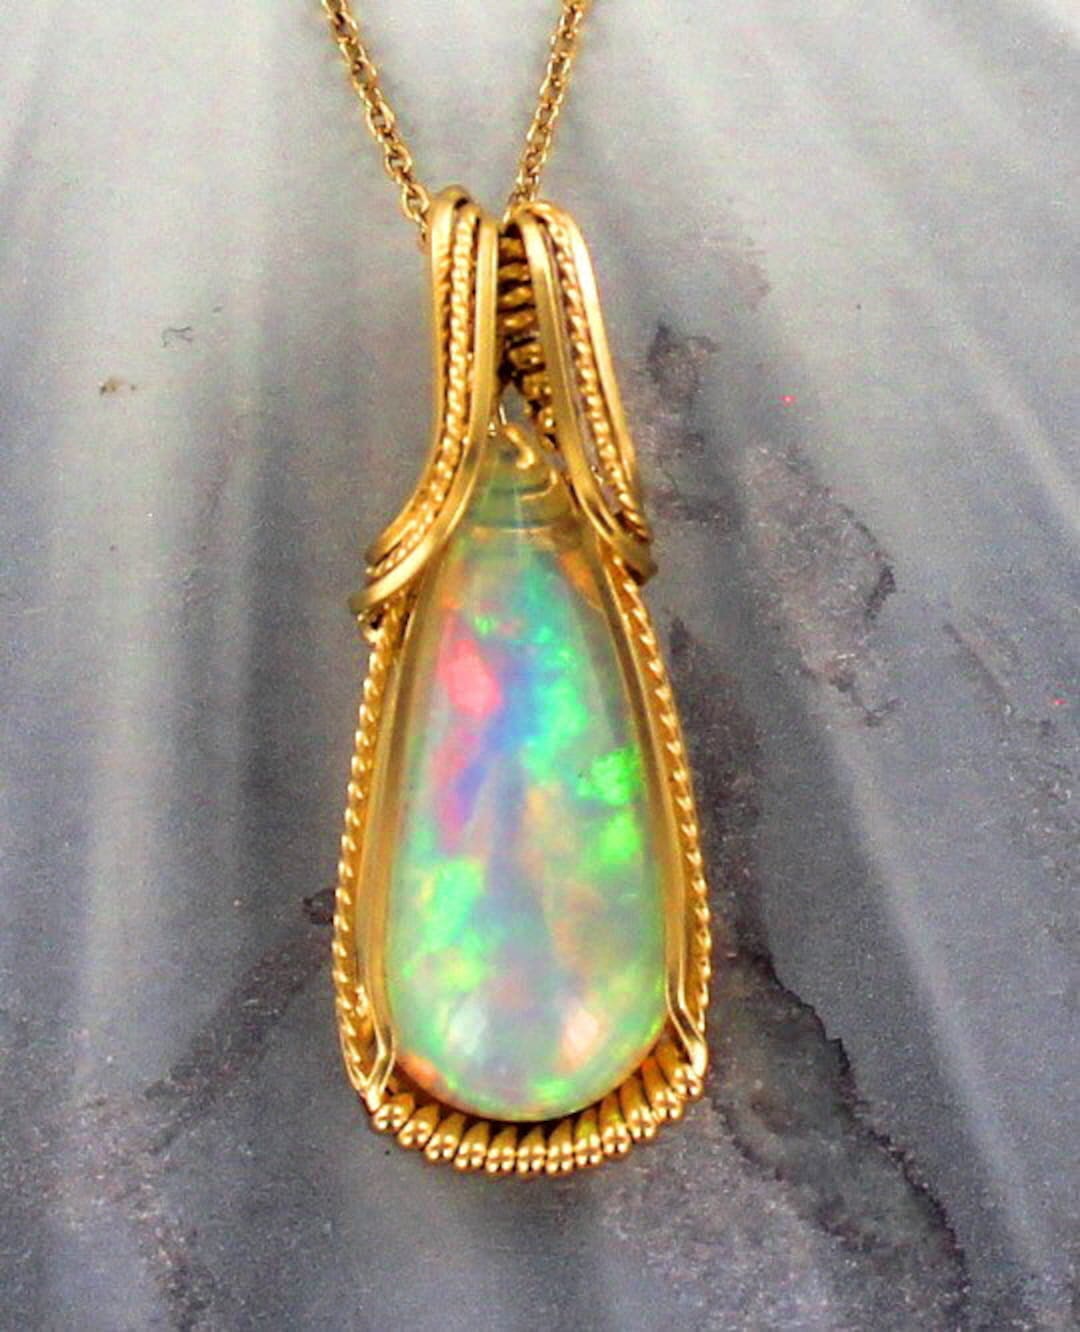 Genuine Opal Pendant 10 Carats Burns Red and Green Fire opal Jewelry ...